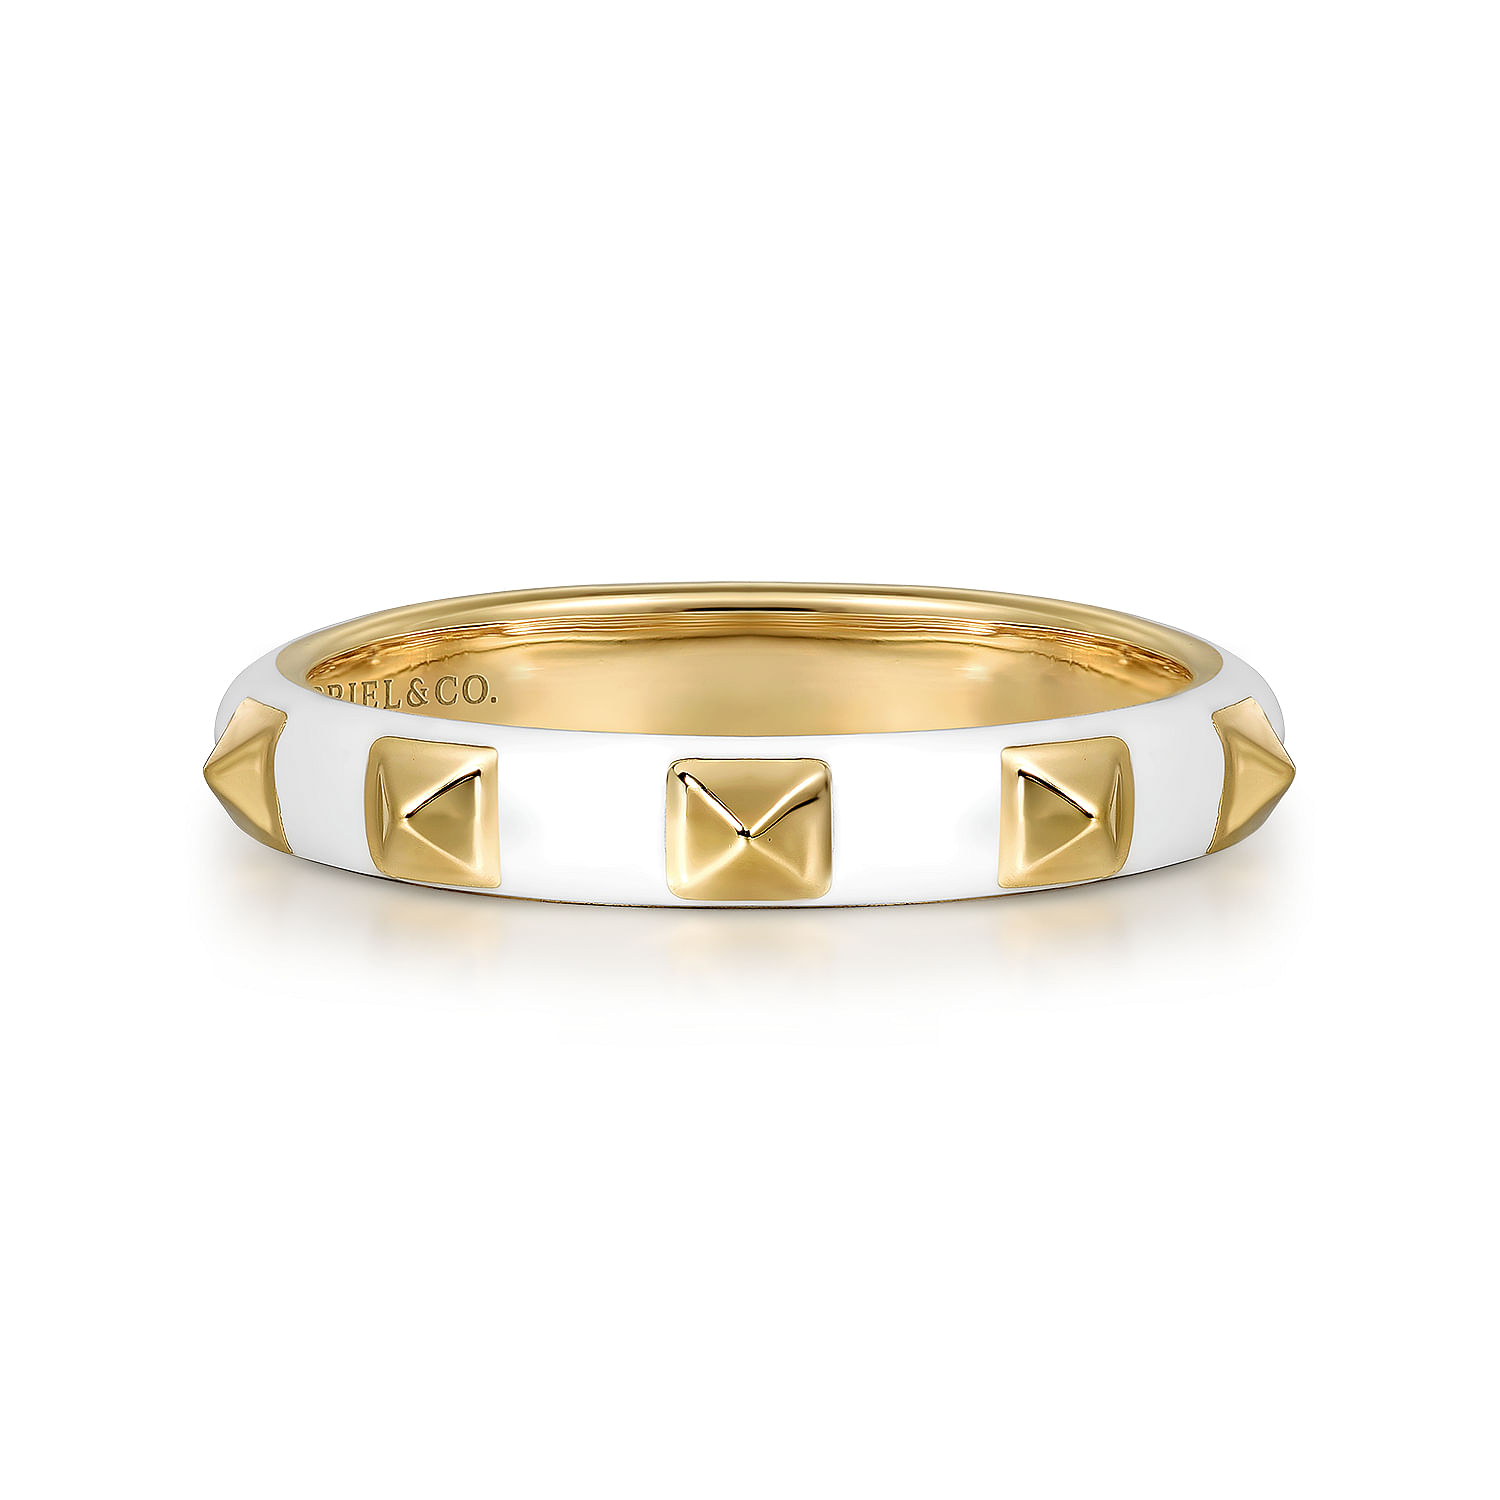 Gabriel - 14K Yellow Gold Pyramid Stackable Ring with White Enamel